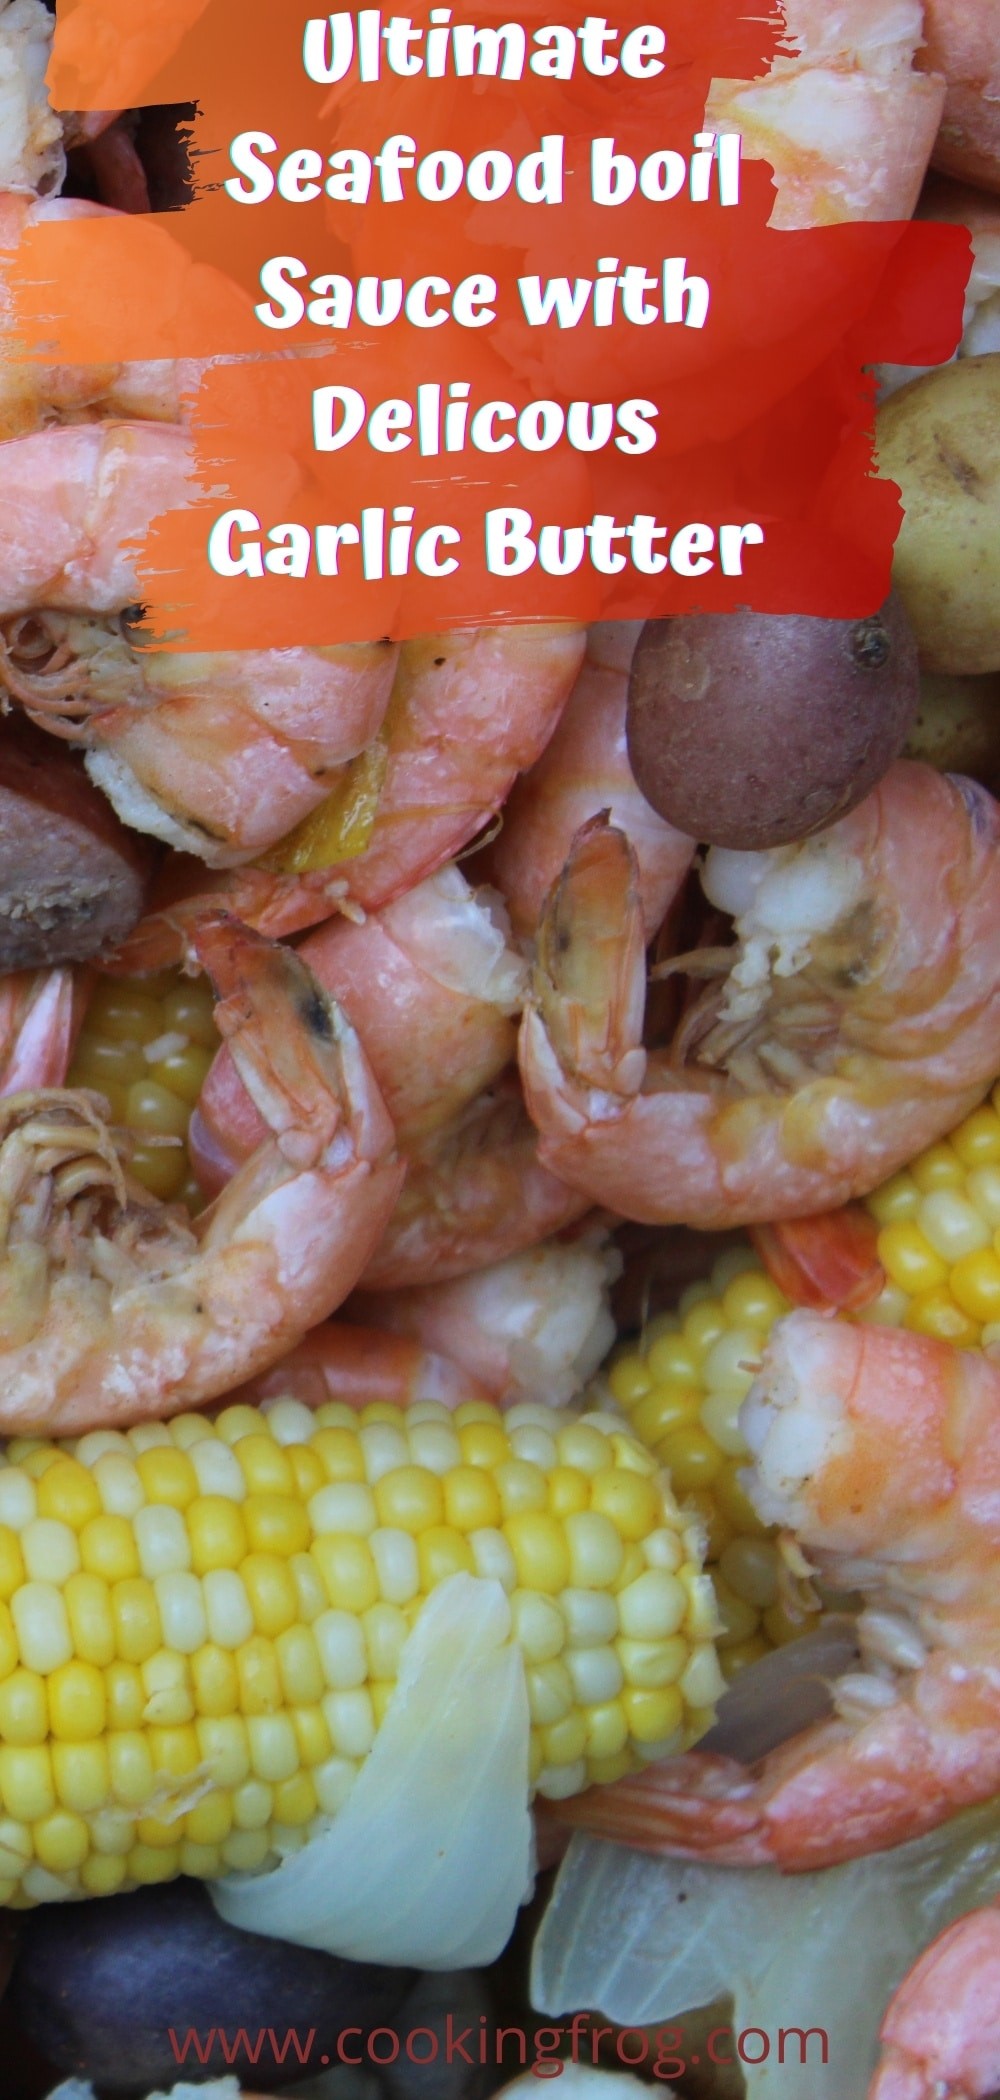 Ultimate Seafood boil Sauce with Delicous Garlic Butter